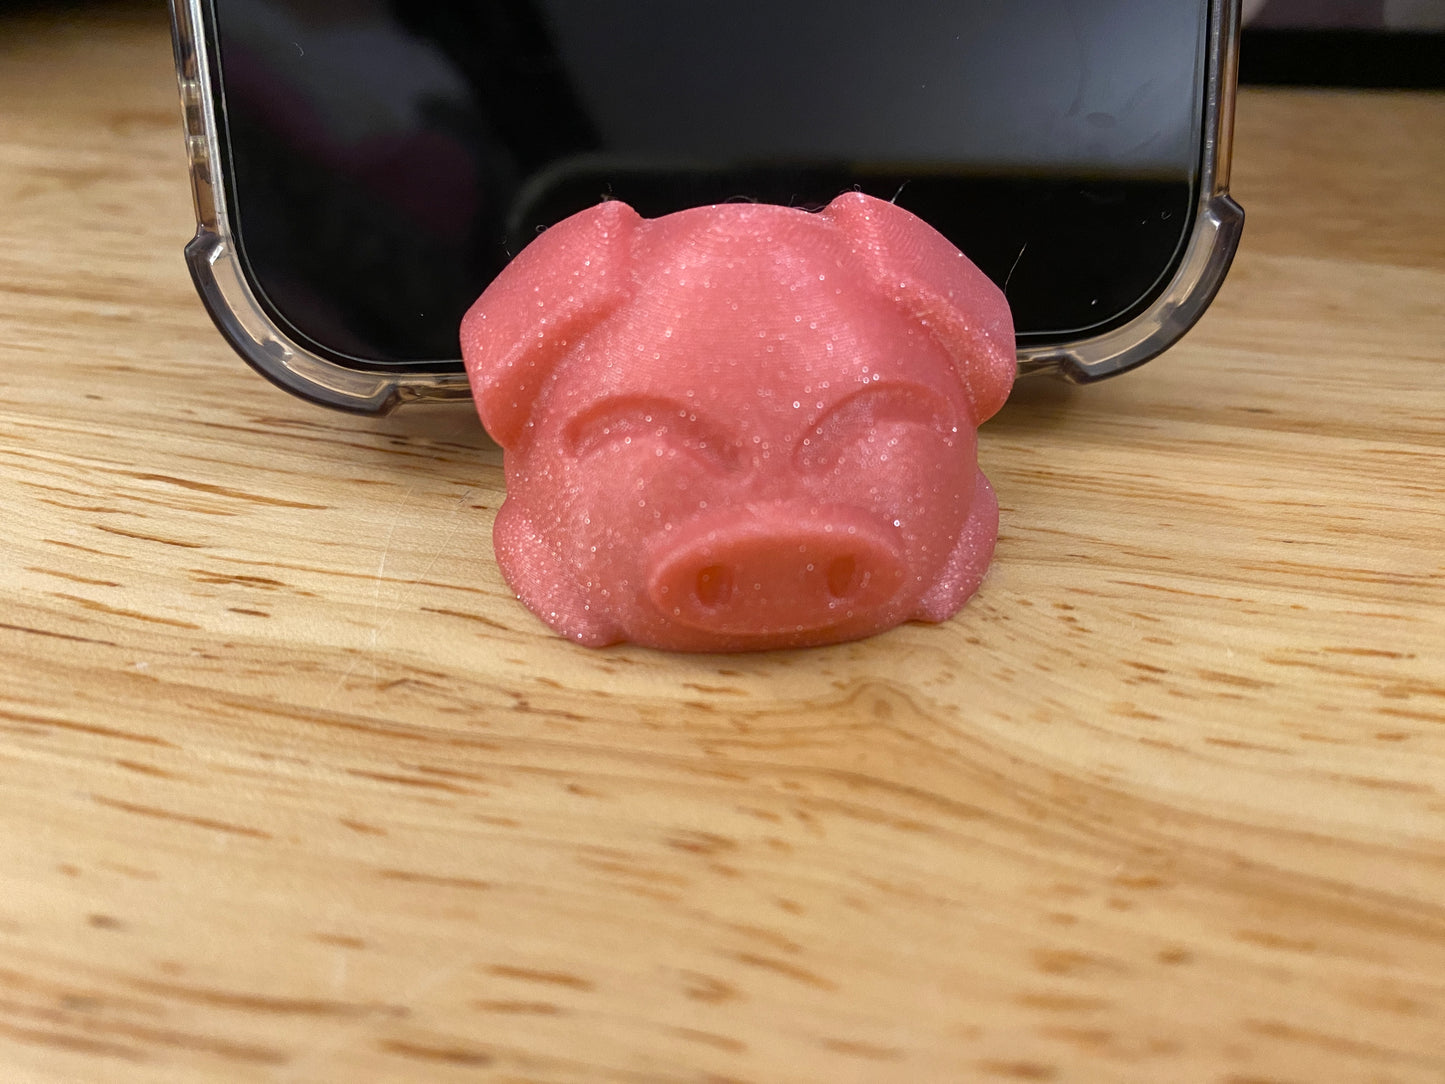 Cute Pig Phone Stand, Pig Stand, Desk Pig stand, Pig Cell Phone Stand